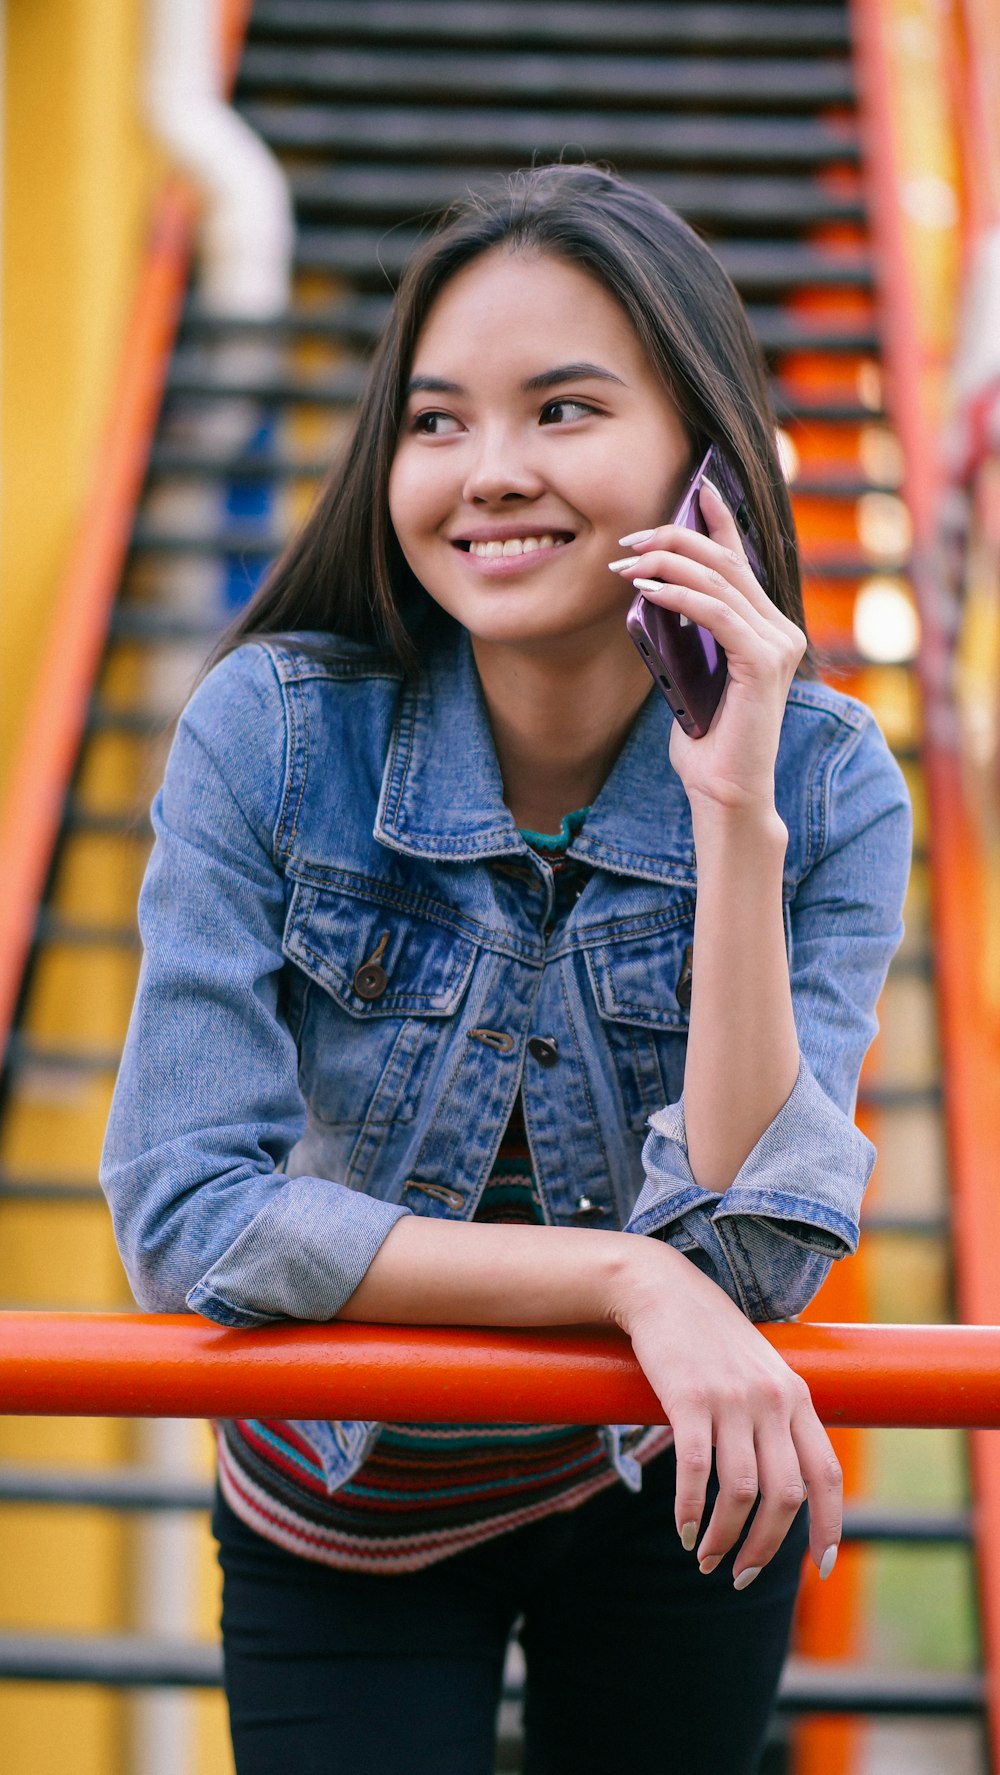 woman leaning on red handrail while using phone